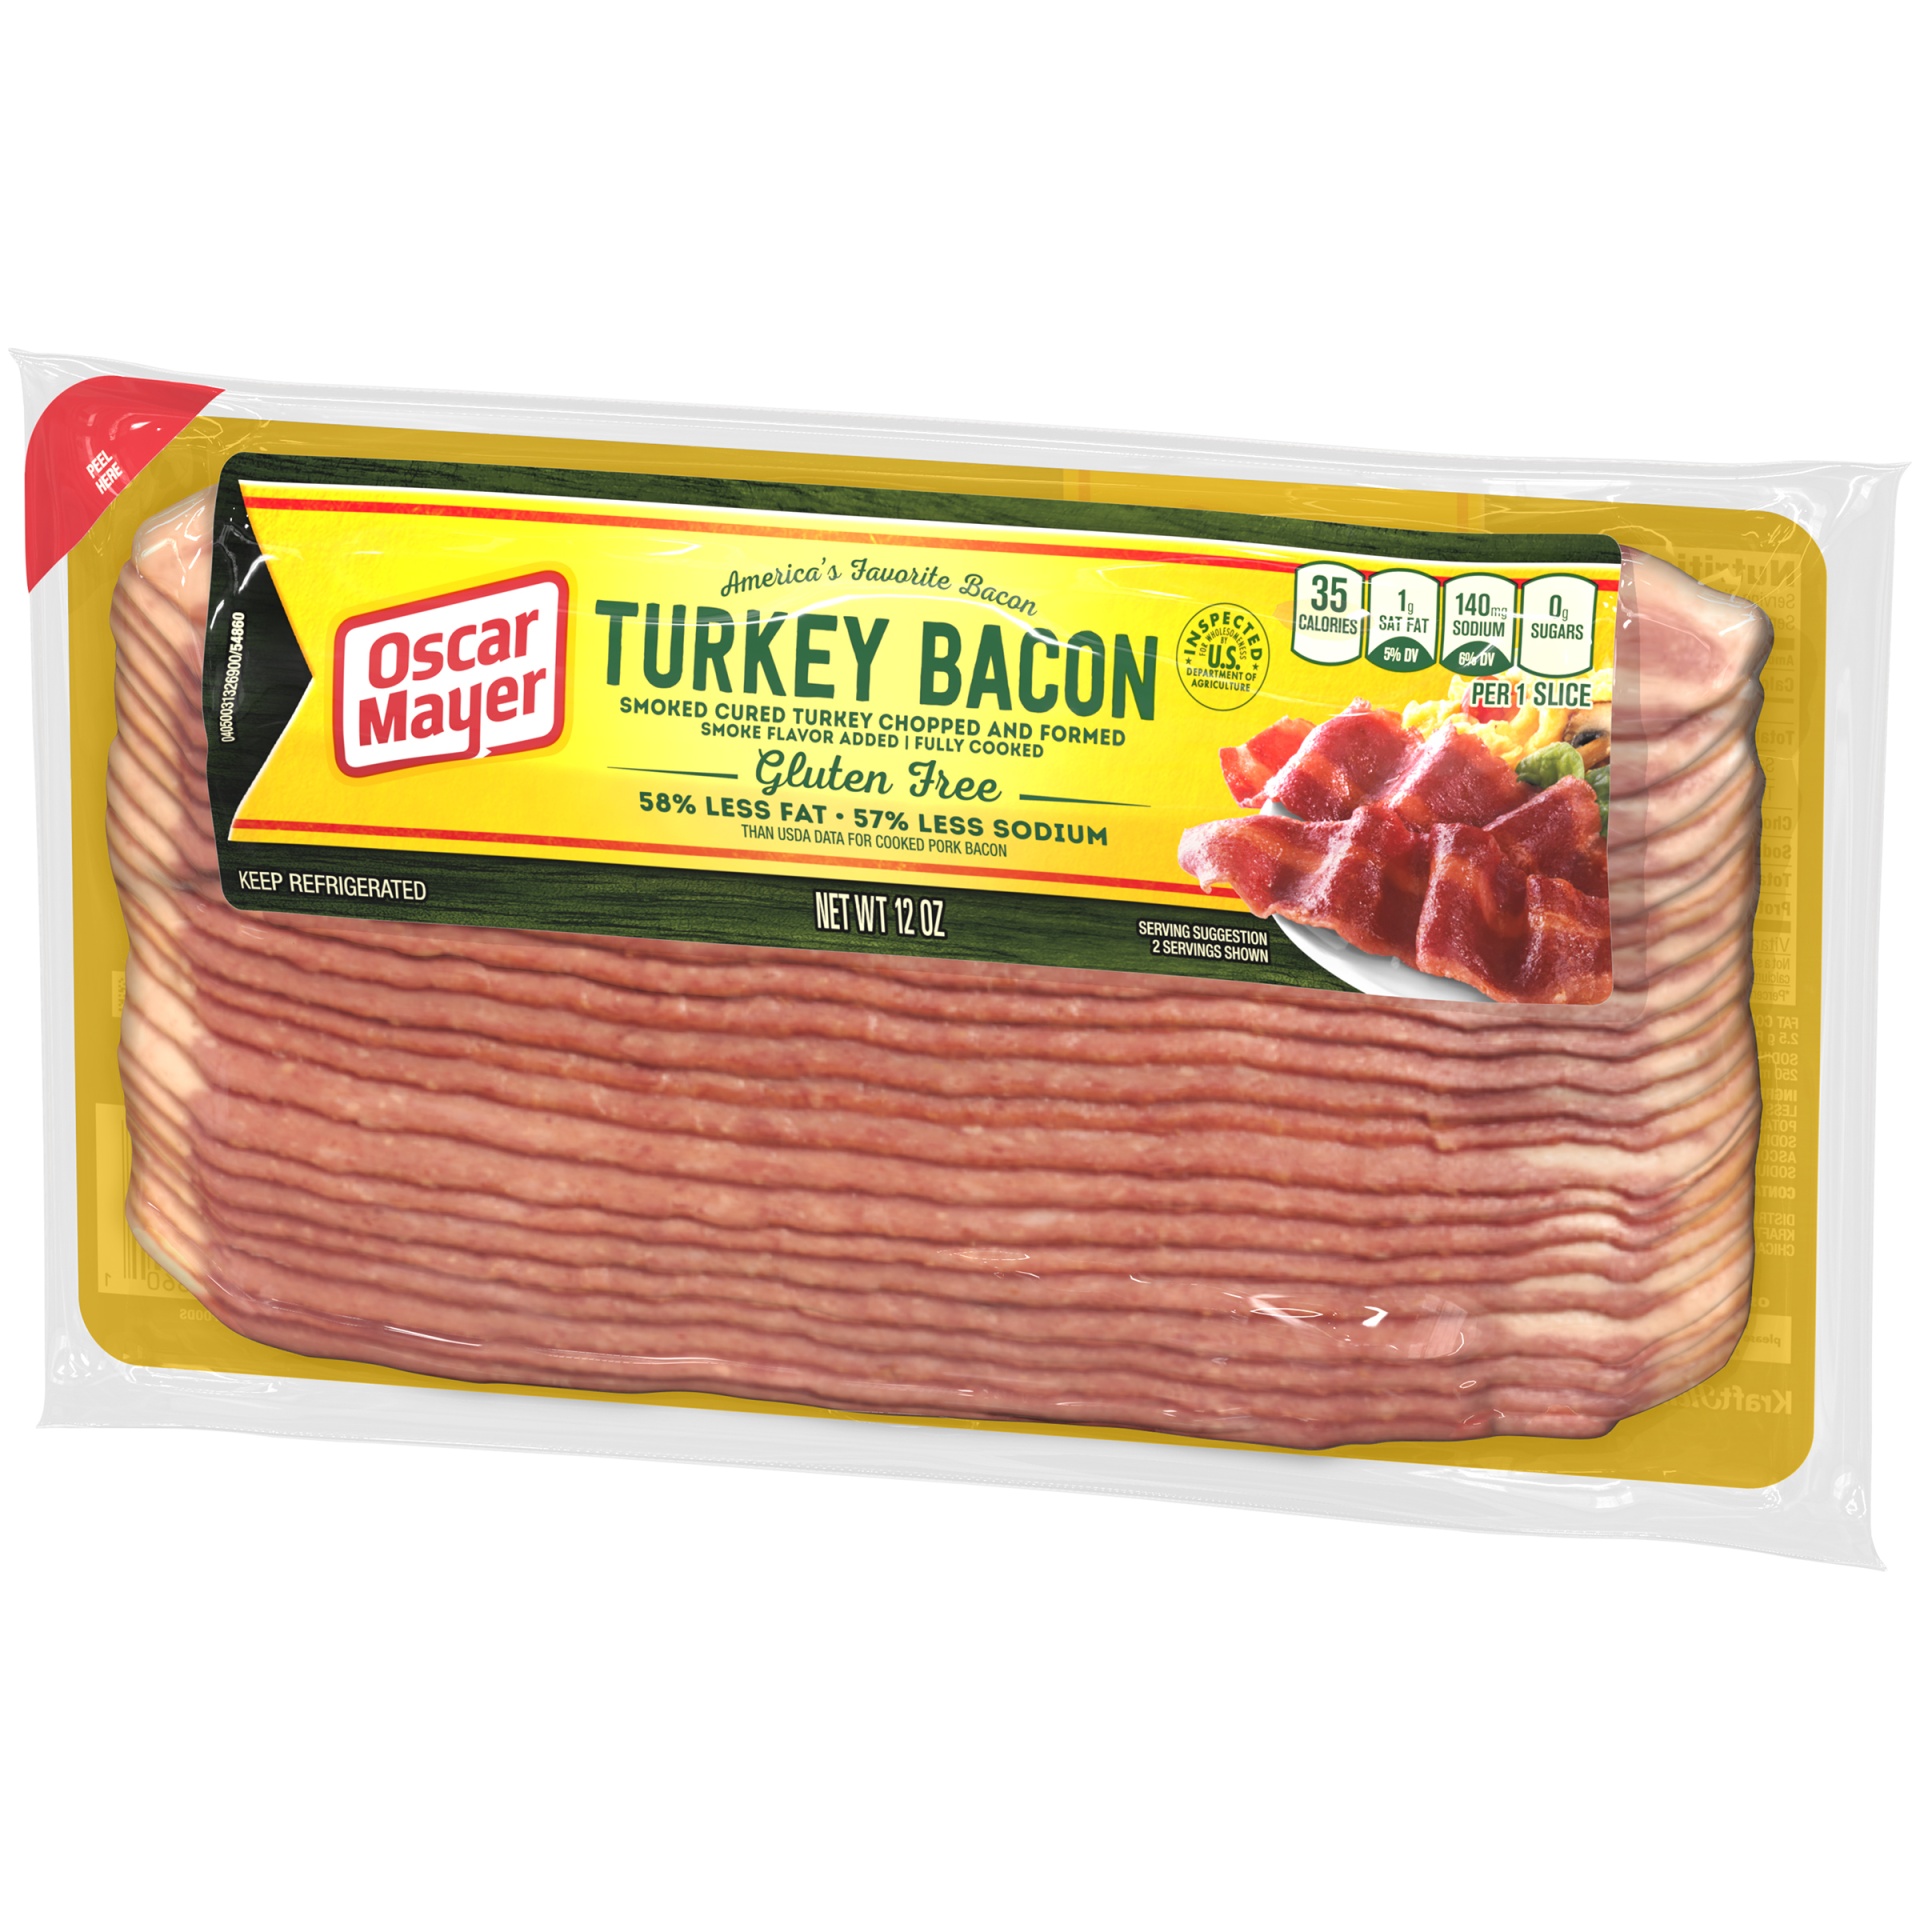 slide 9 of 12, Oscar Mayer Fully Cooked & Gluten Free Turkey Bacon with 58% Less Fat & 57% Less Sodium Pack, 21-23 slices, 12 oz